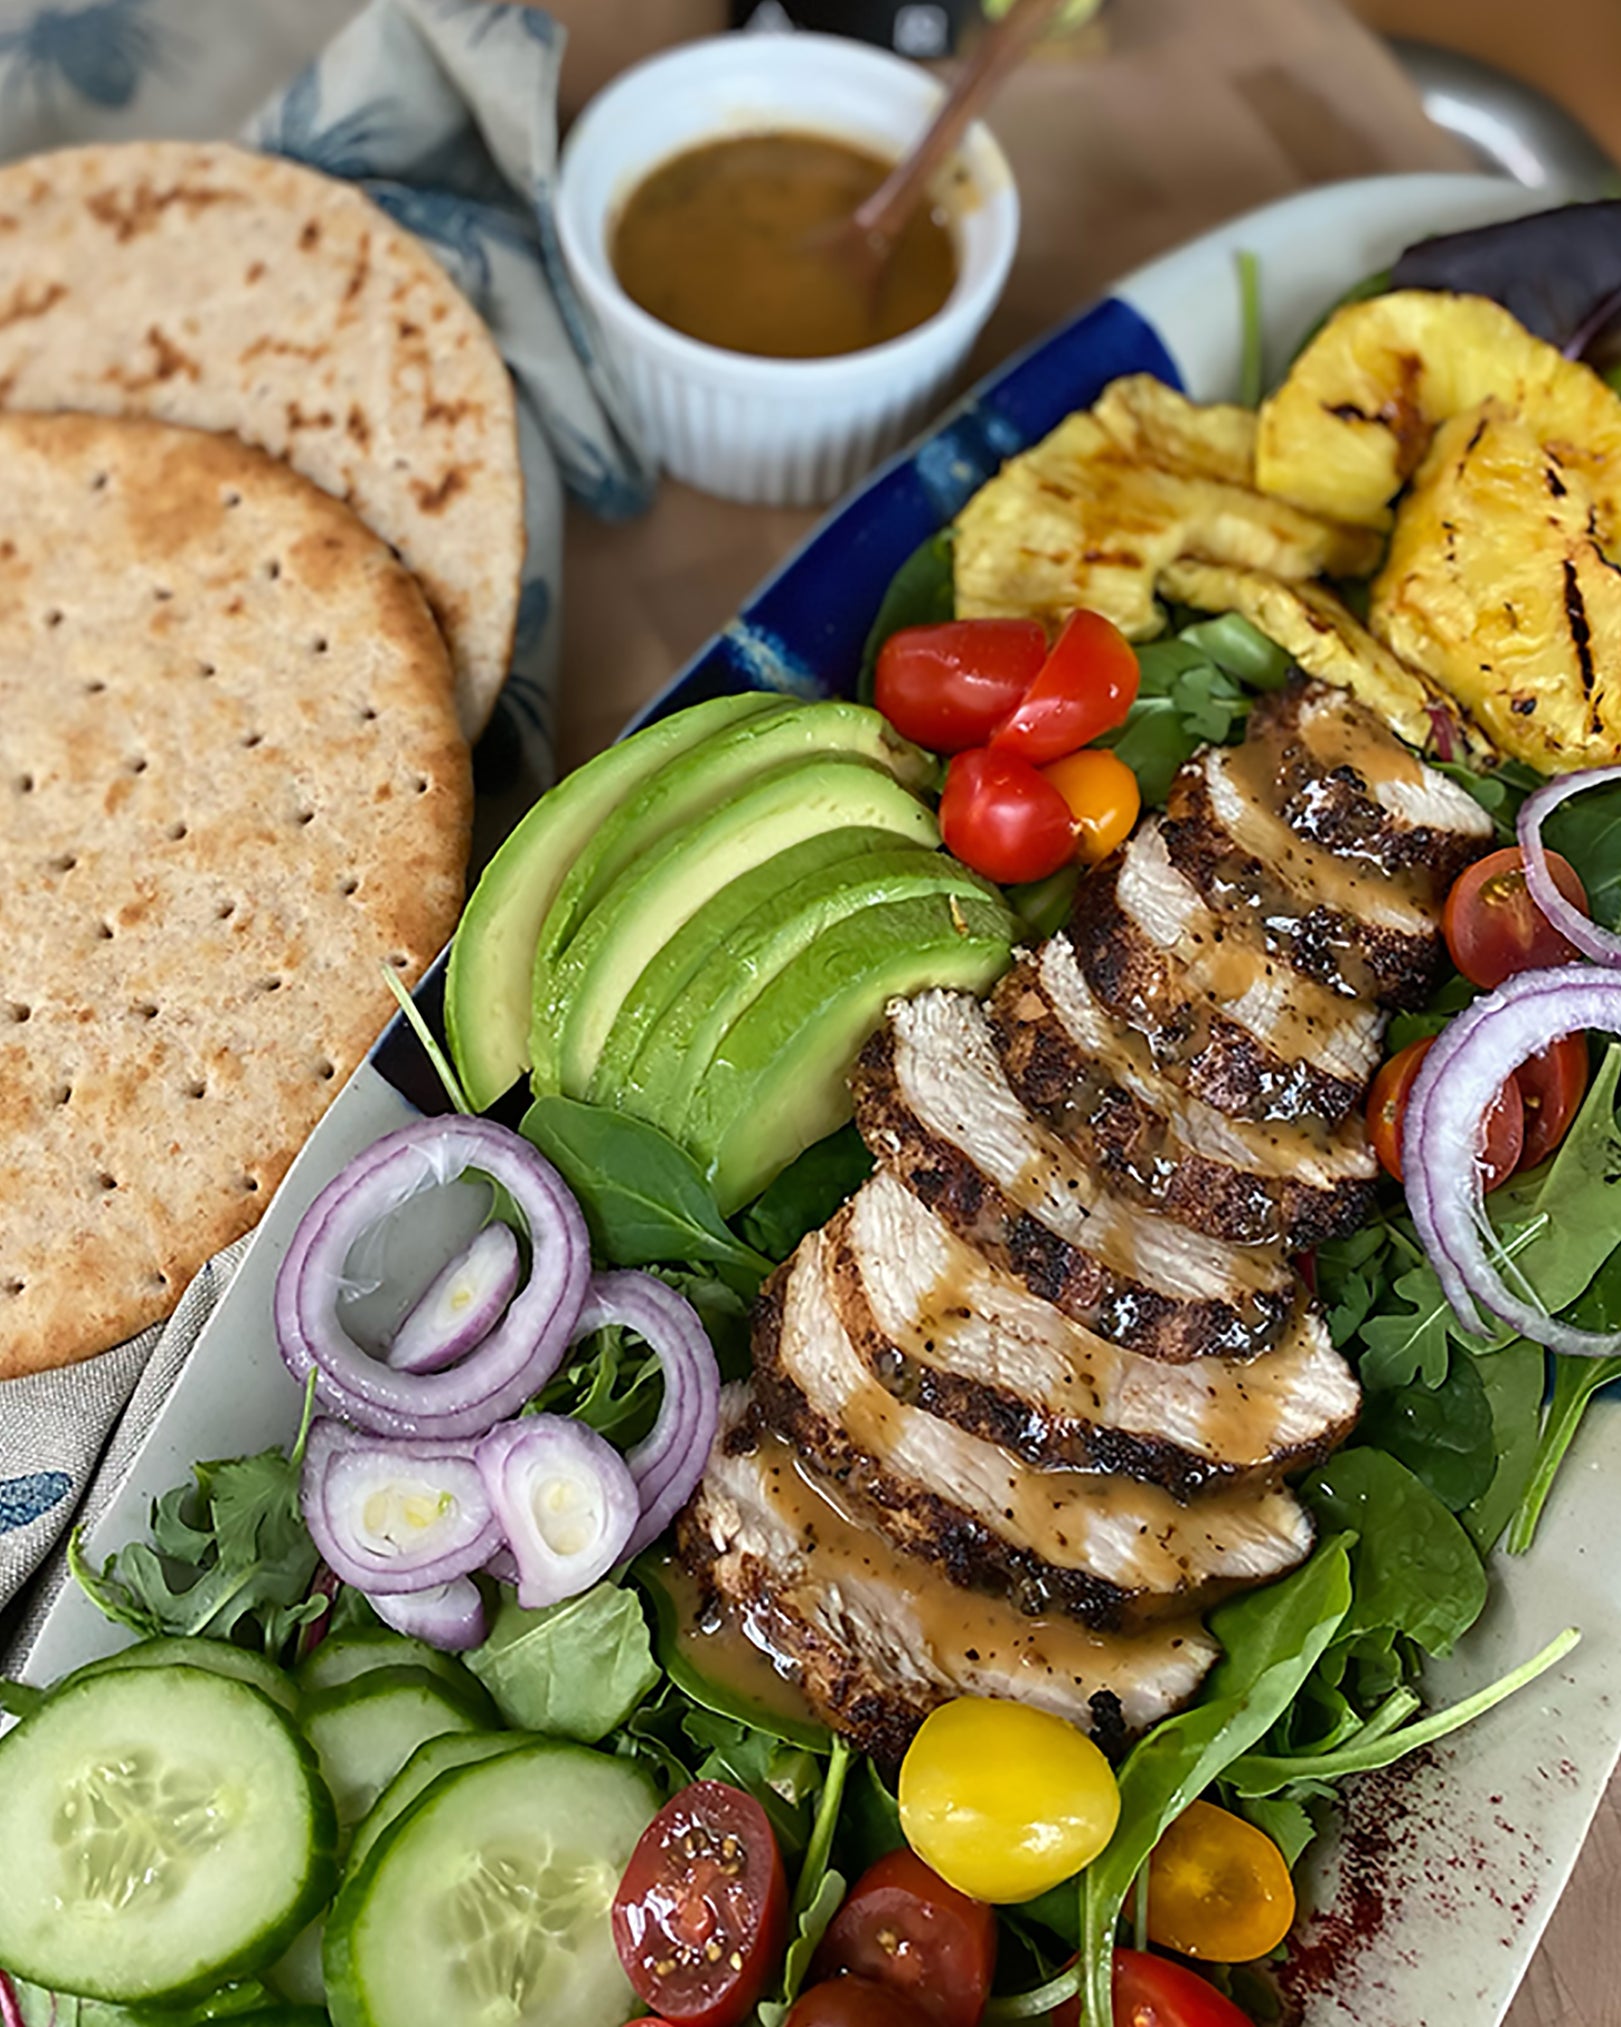 Sliced chicken on salad with pita on the side